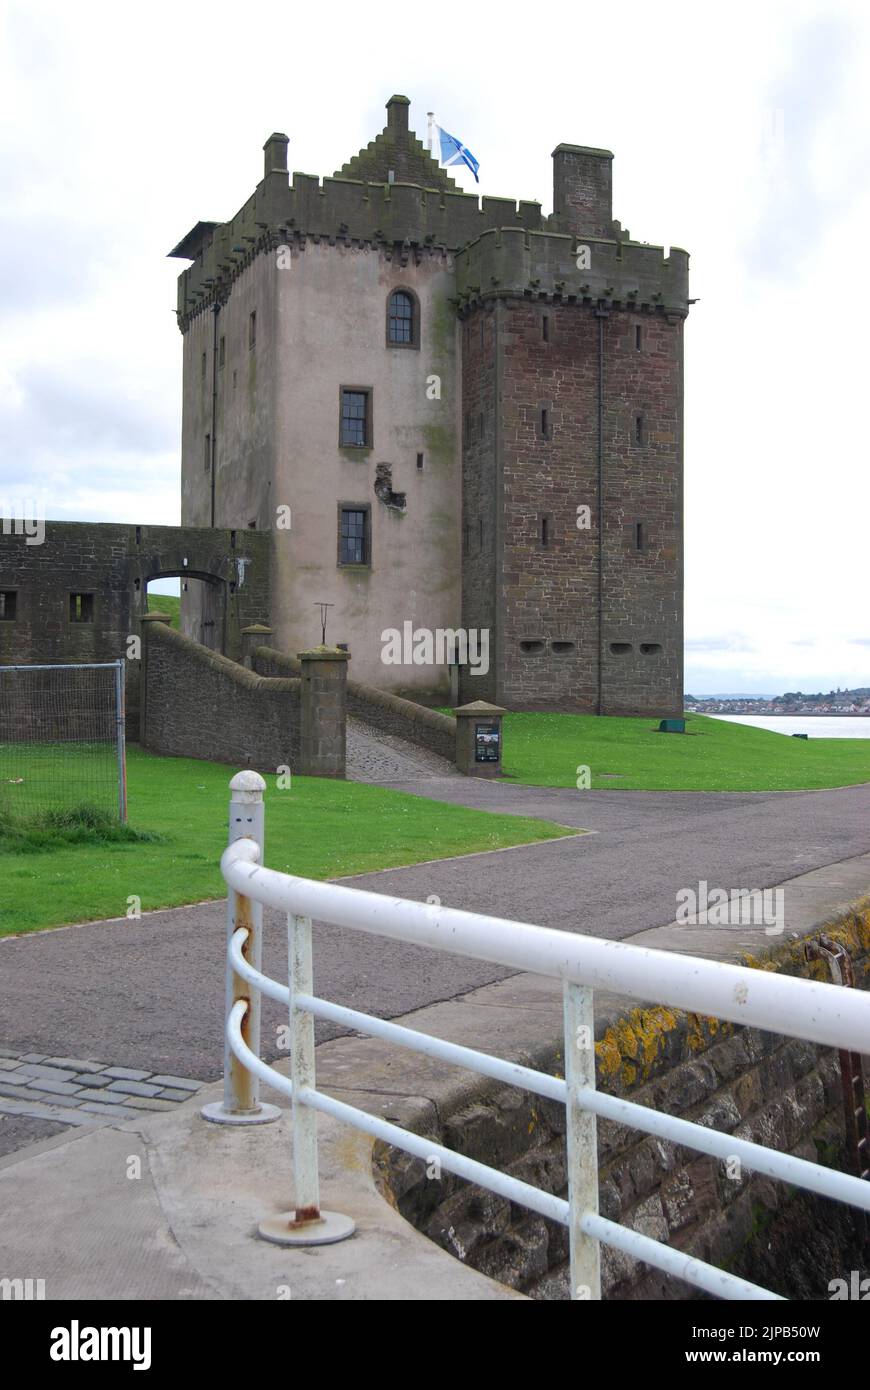 Broughty Castle, with white railings in foreground and saltire flag flying, sits at the mouth of the Tay Estuary at Broughty Ferry, near Dundee. Stock Photo